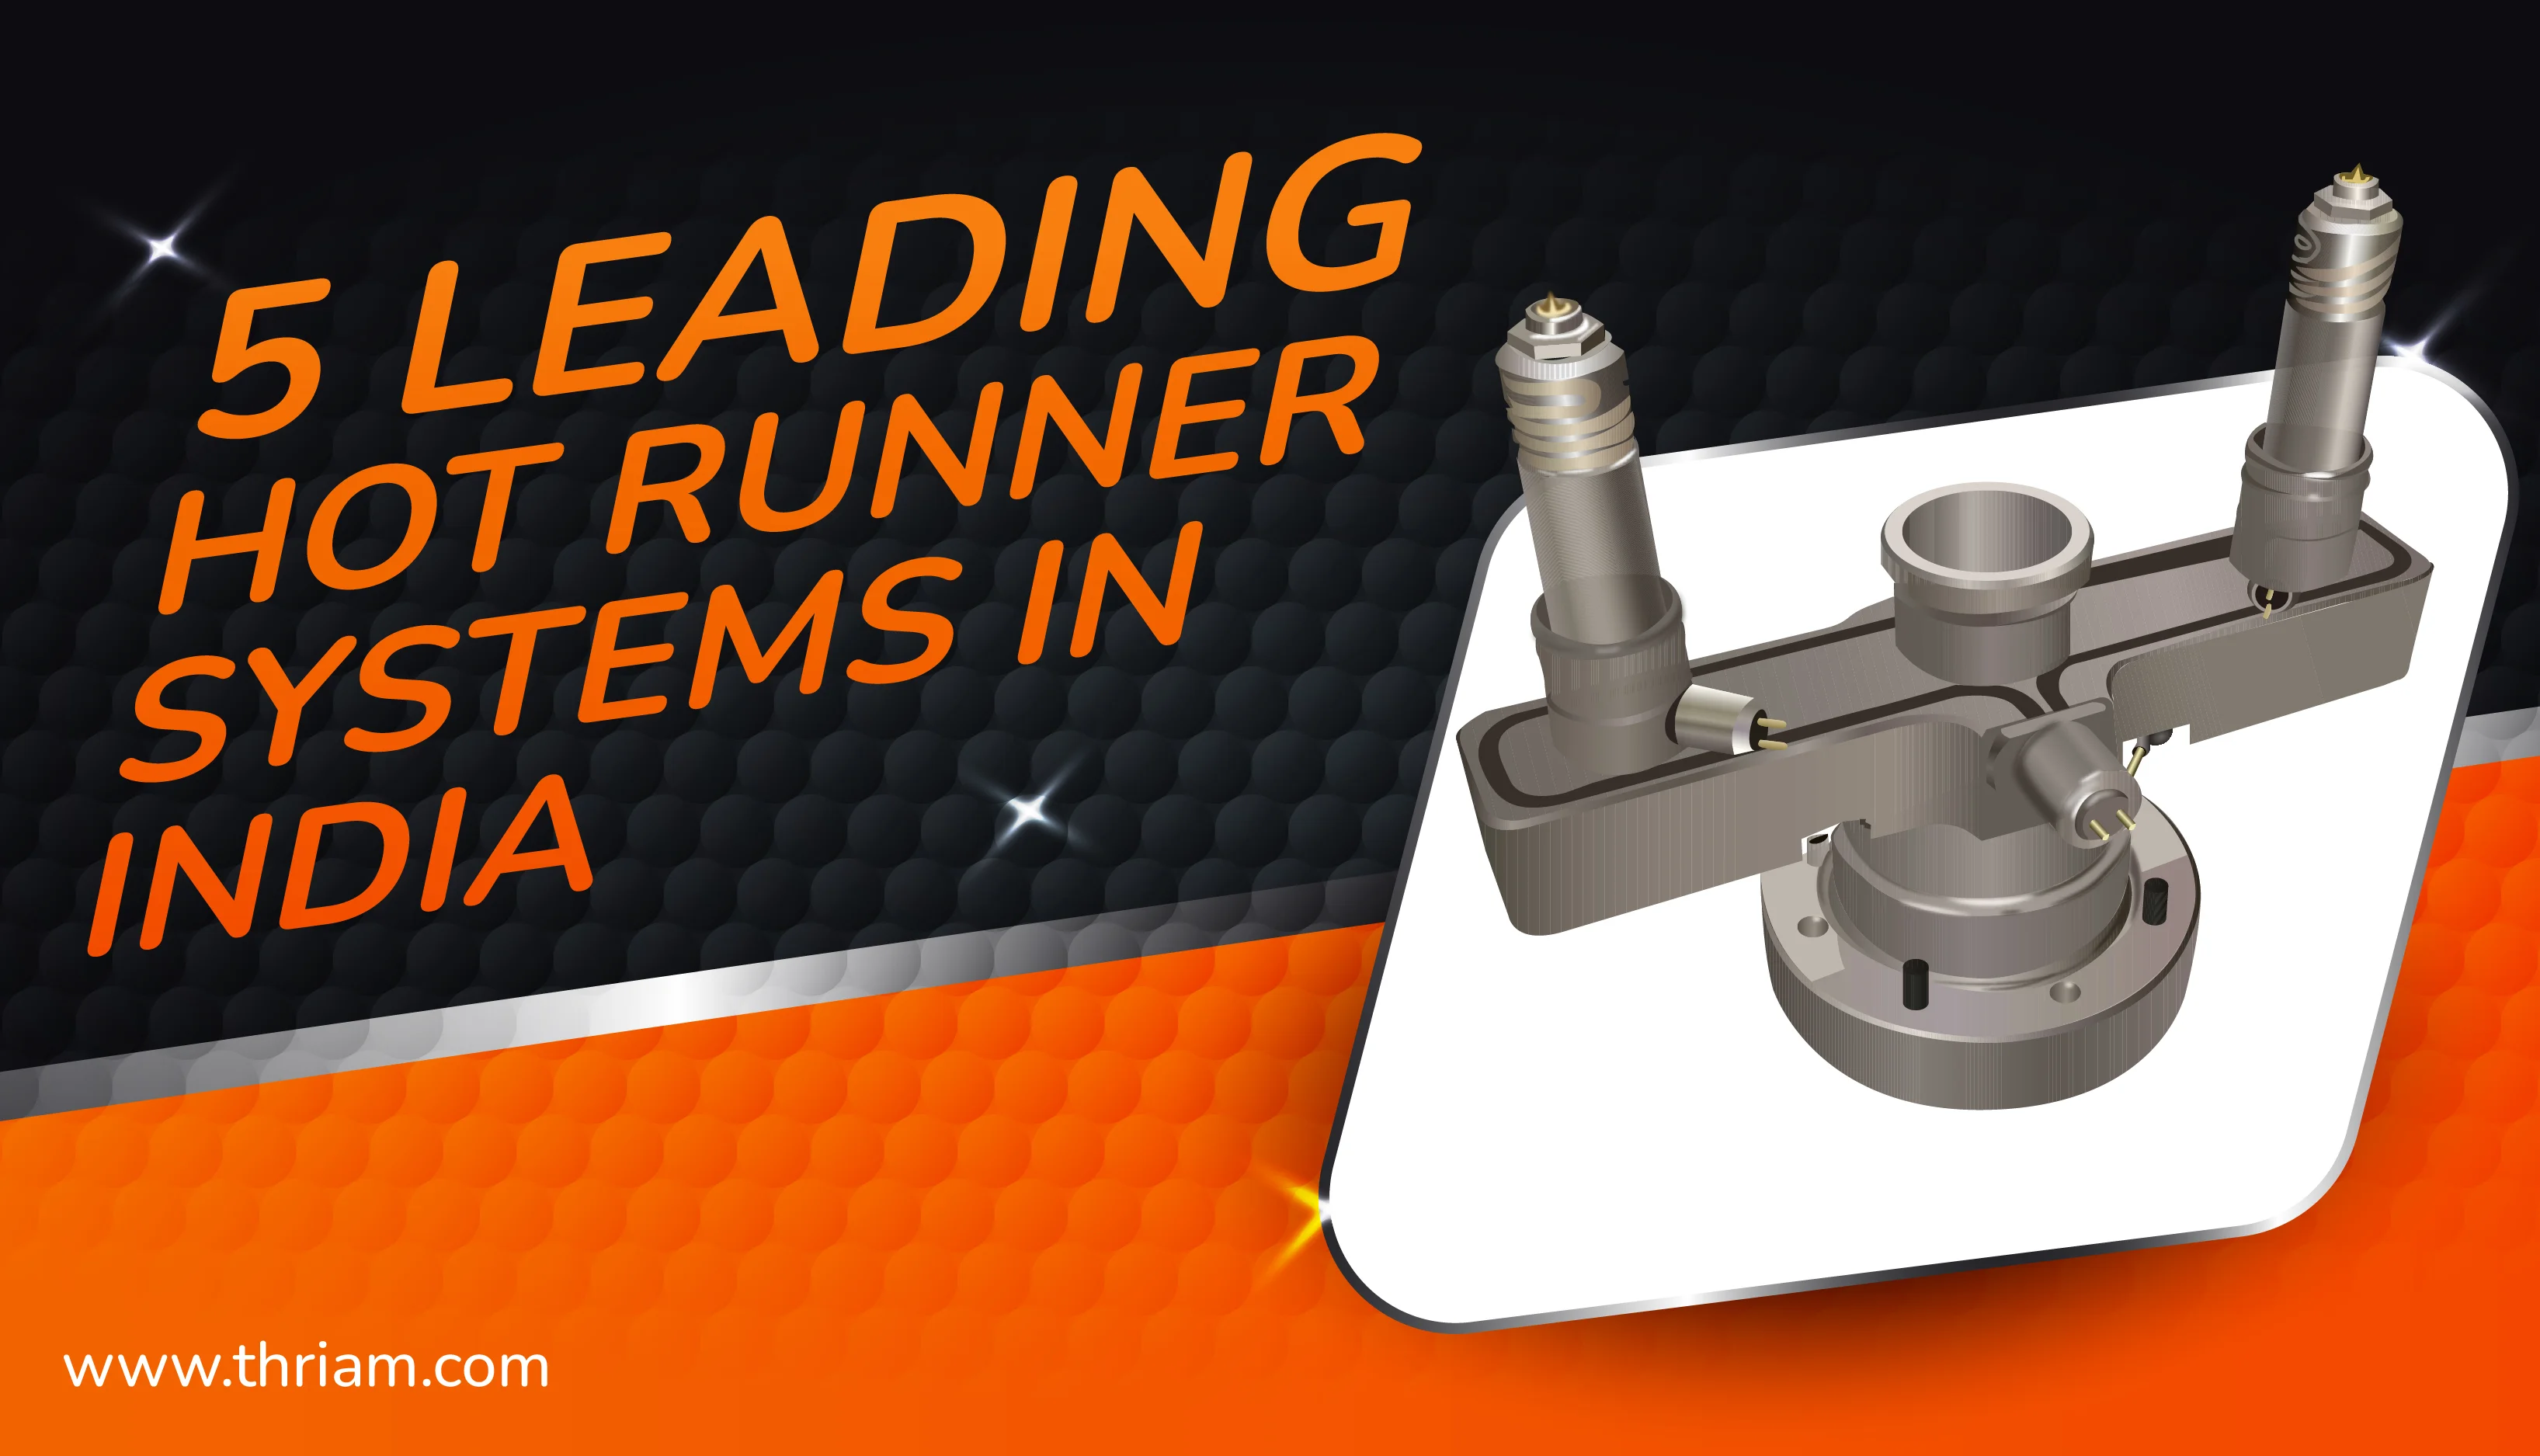 5 Leading hot runner systems in India banner by Thriam